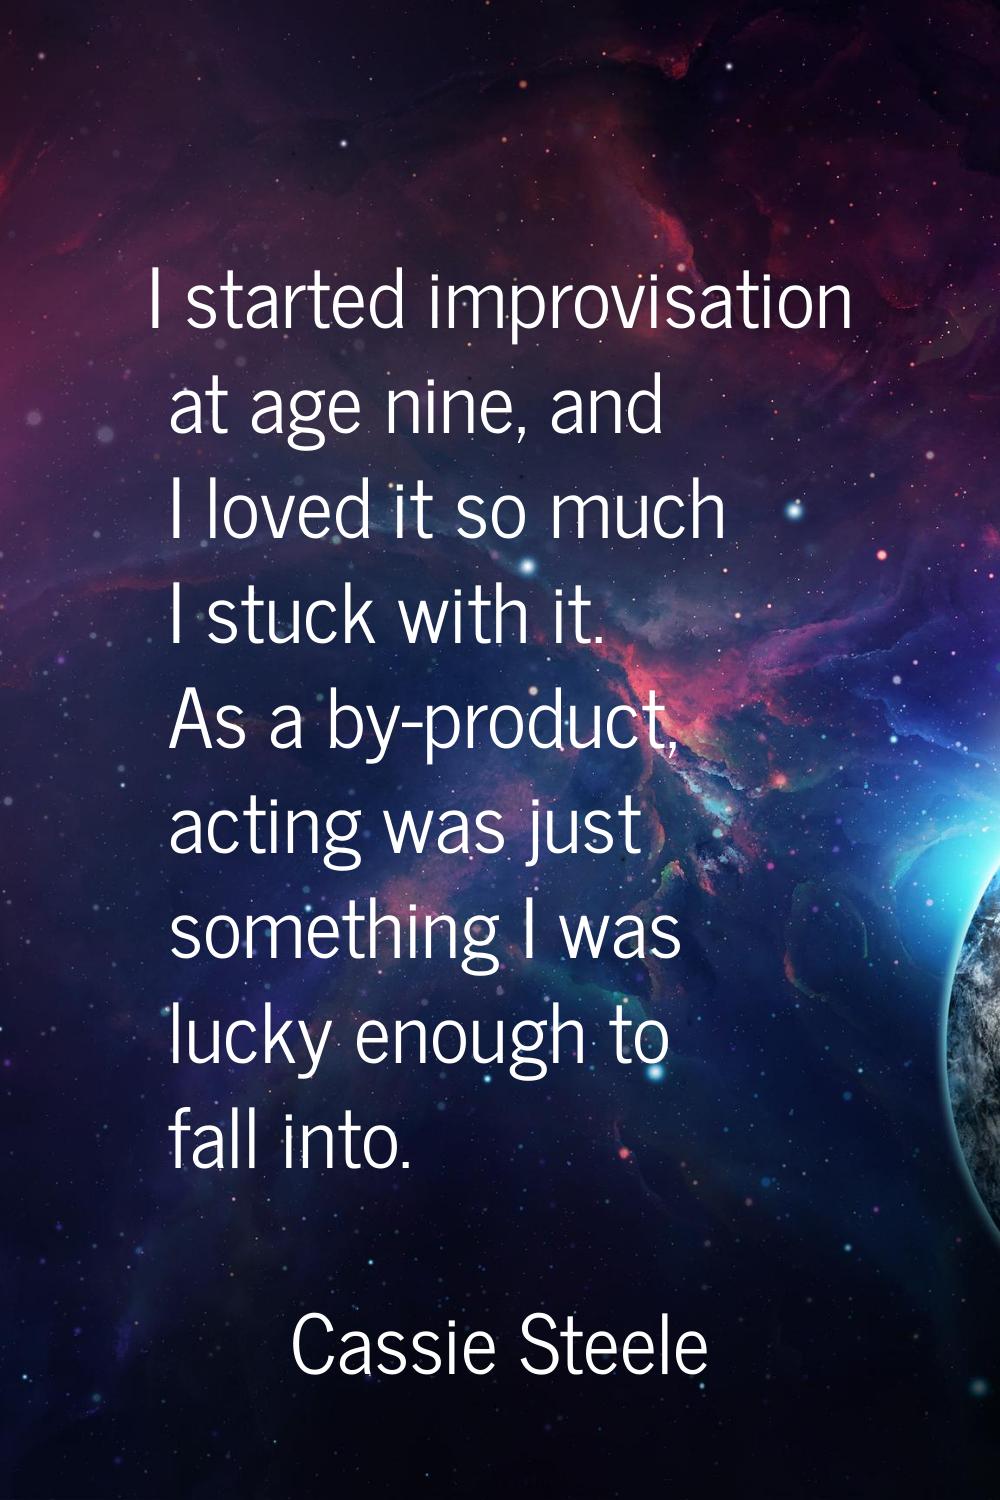 I started improvisation at age nine, and I loved it so much I stuck with it. As a by-product, actin